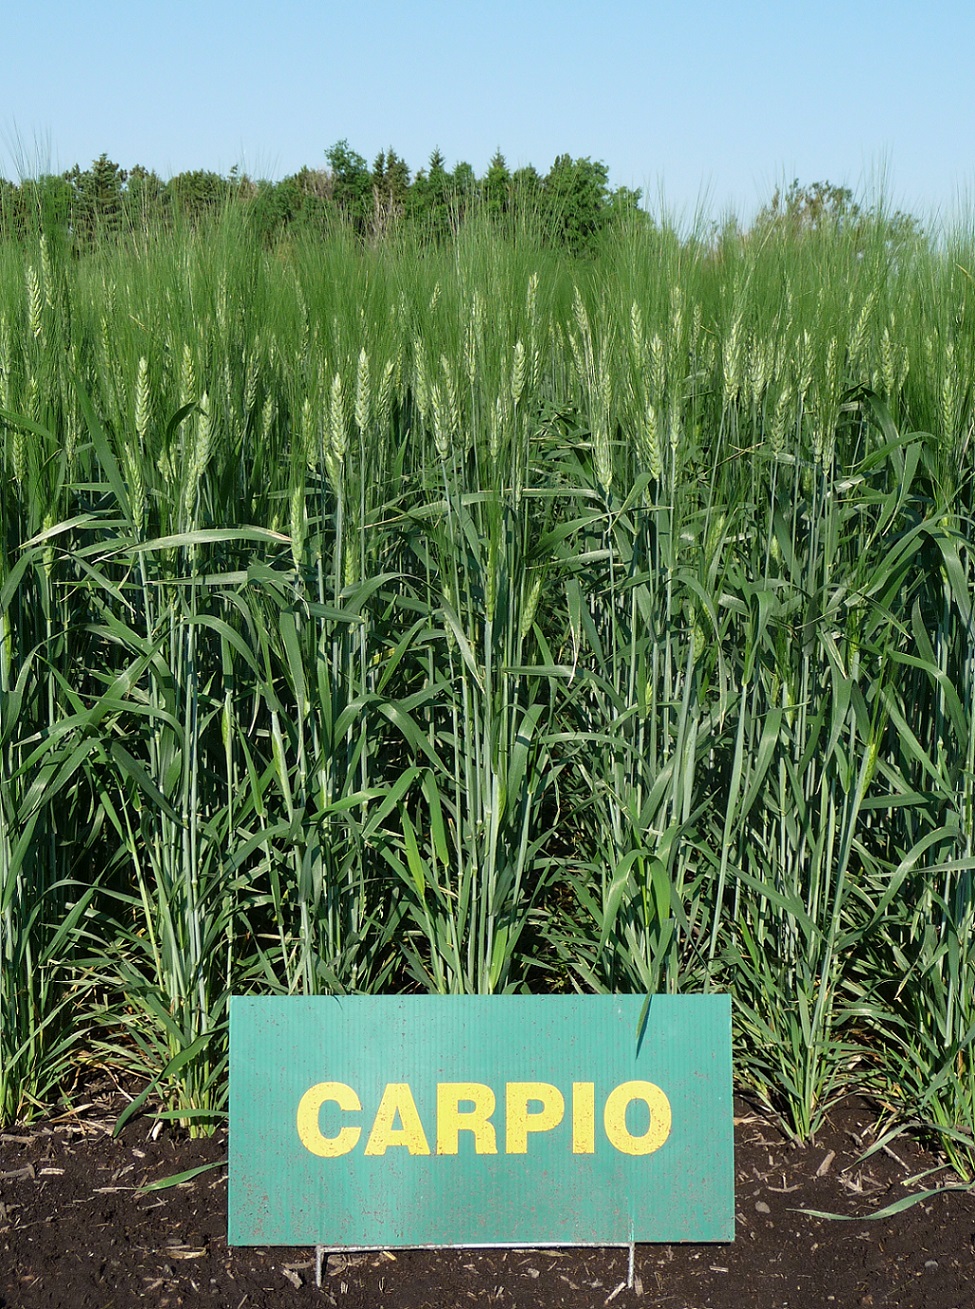 Carpio has very good protein content and test weight.